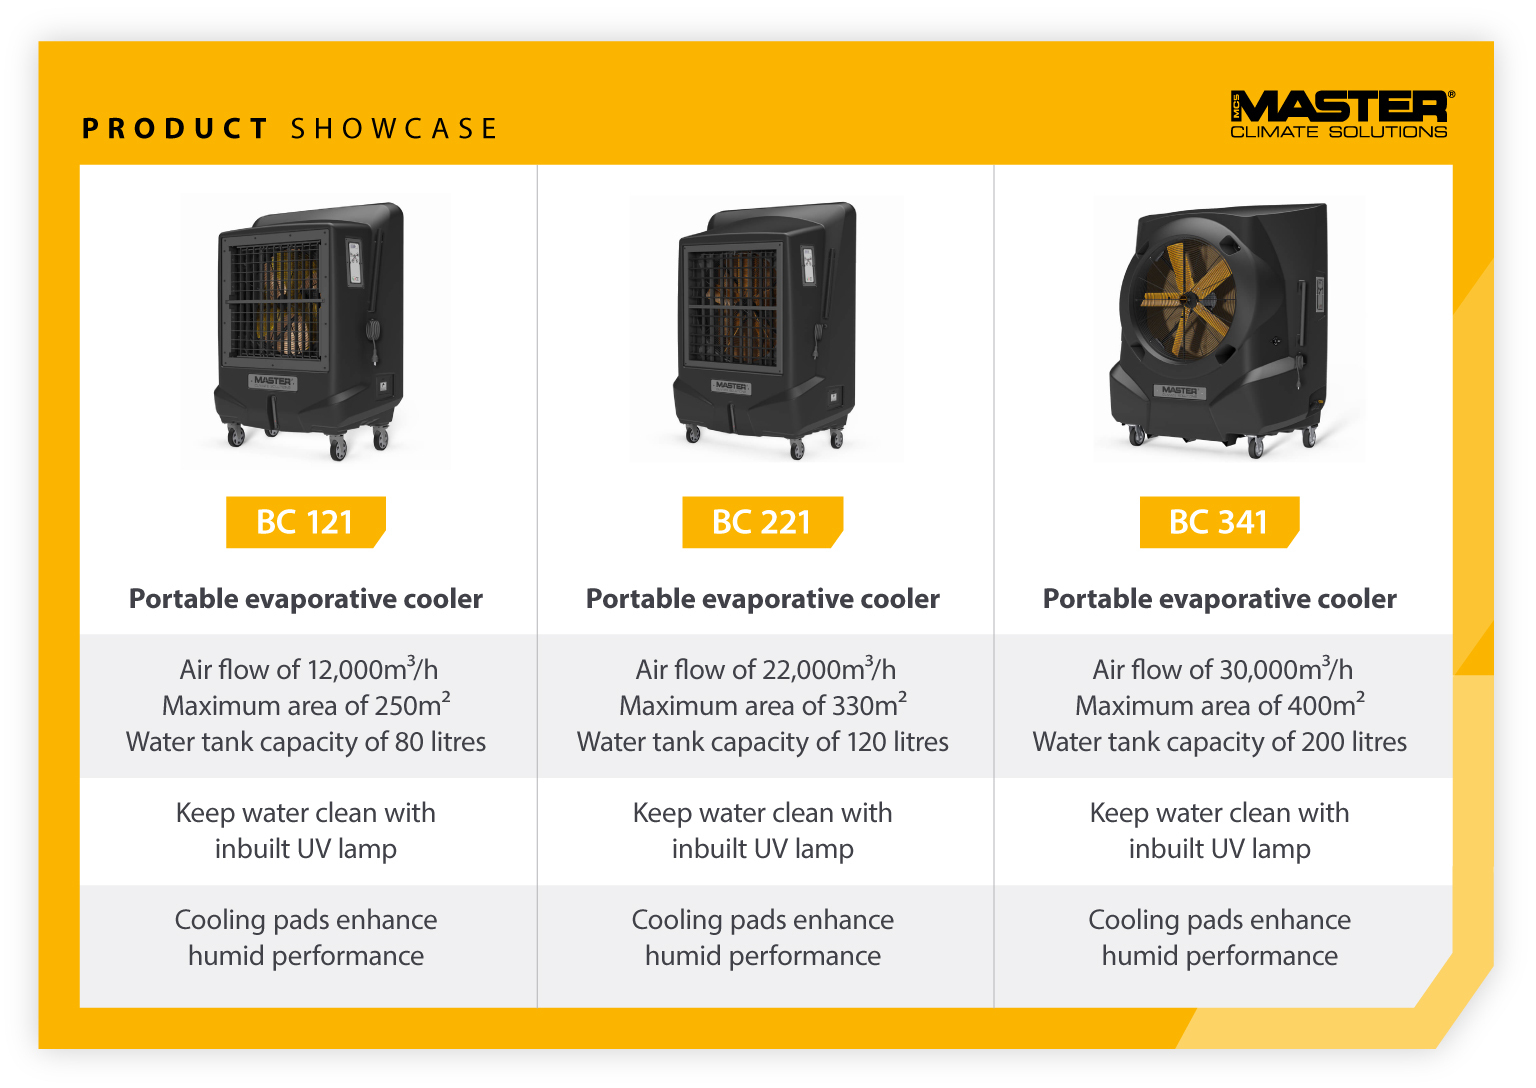 Product showcase comparing features of Master portable evaporate cooler units